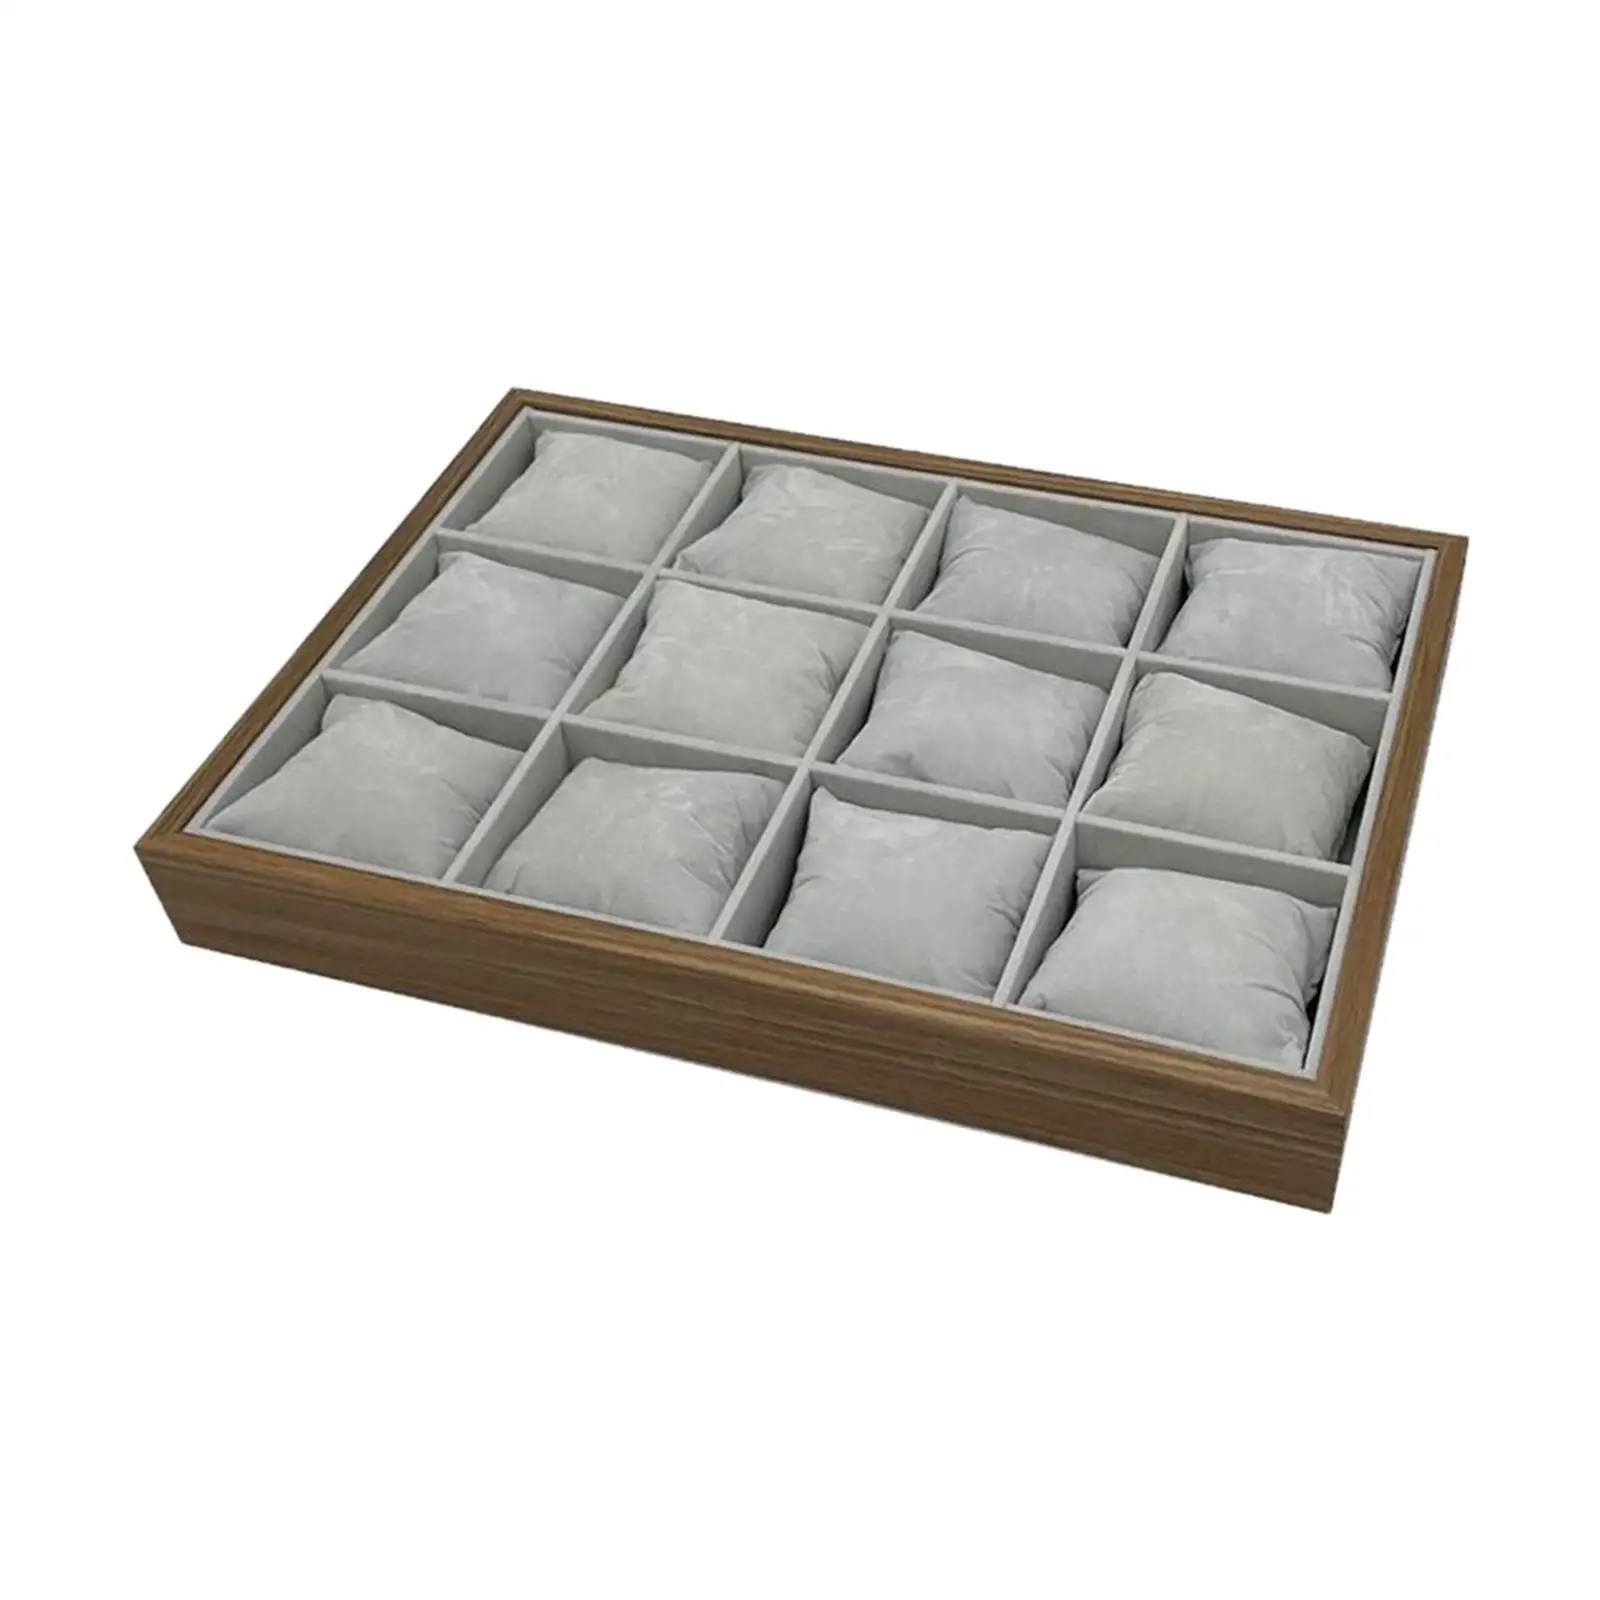 12 Slot Watch Box Organizer with Removable Pillow Showcase for Cards Jewelry